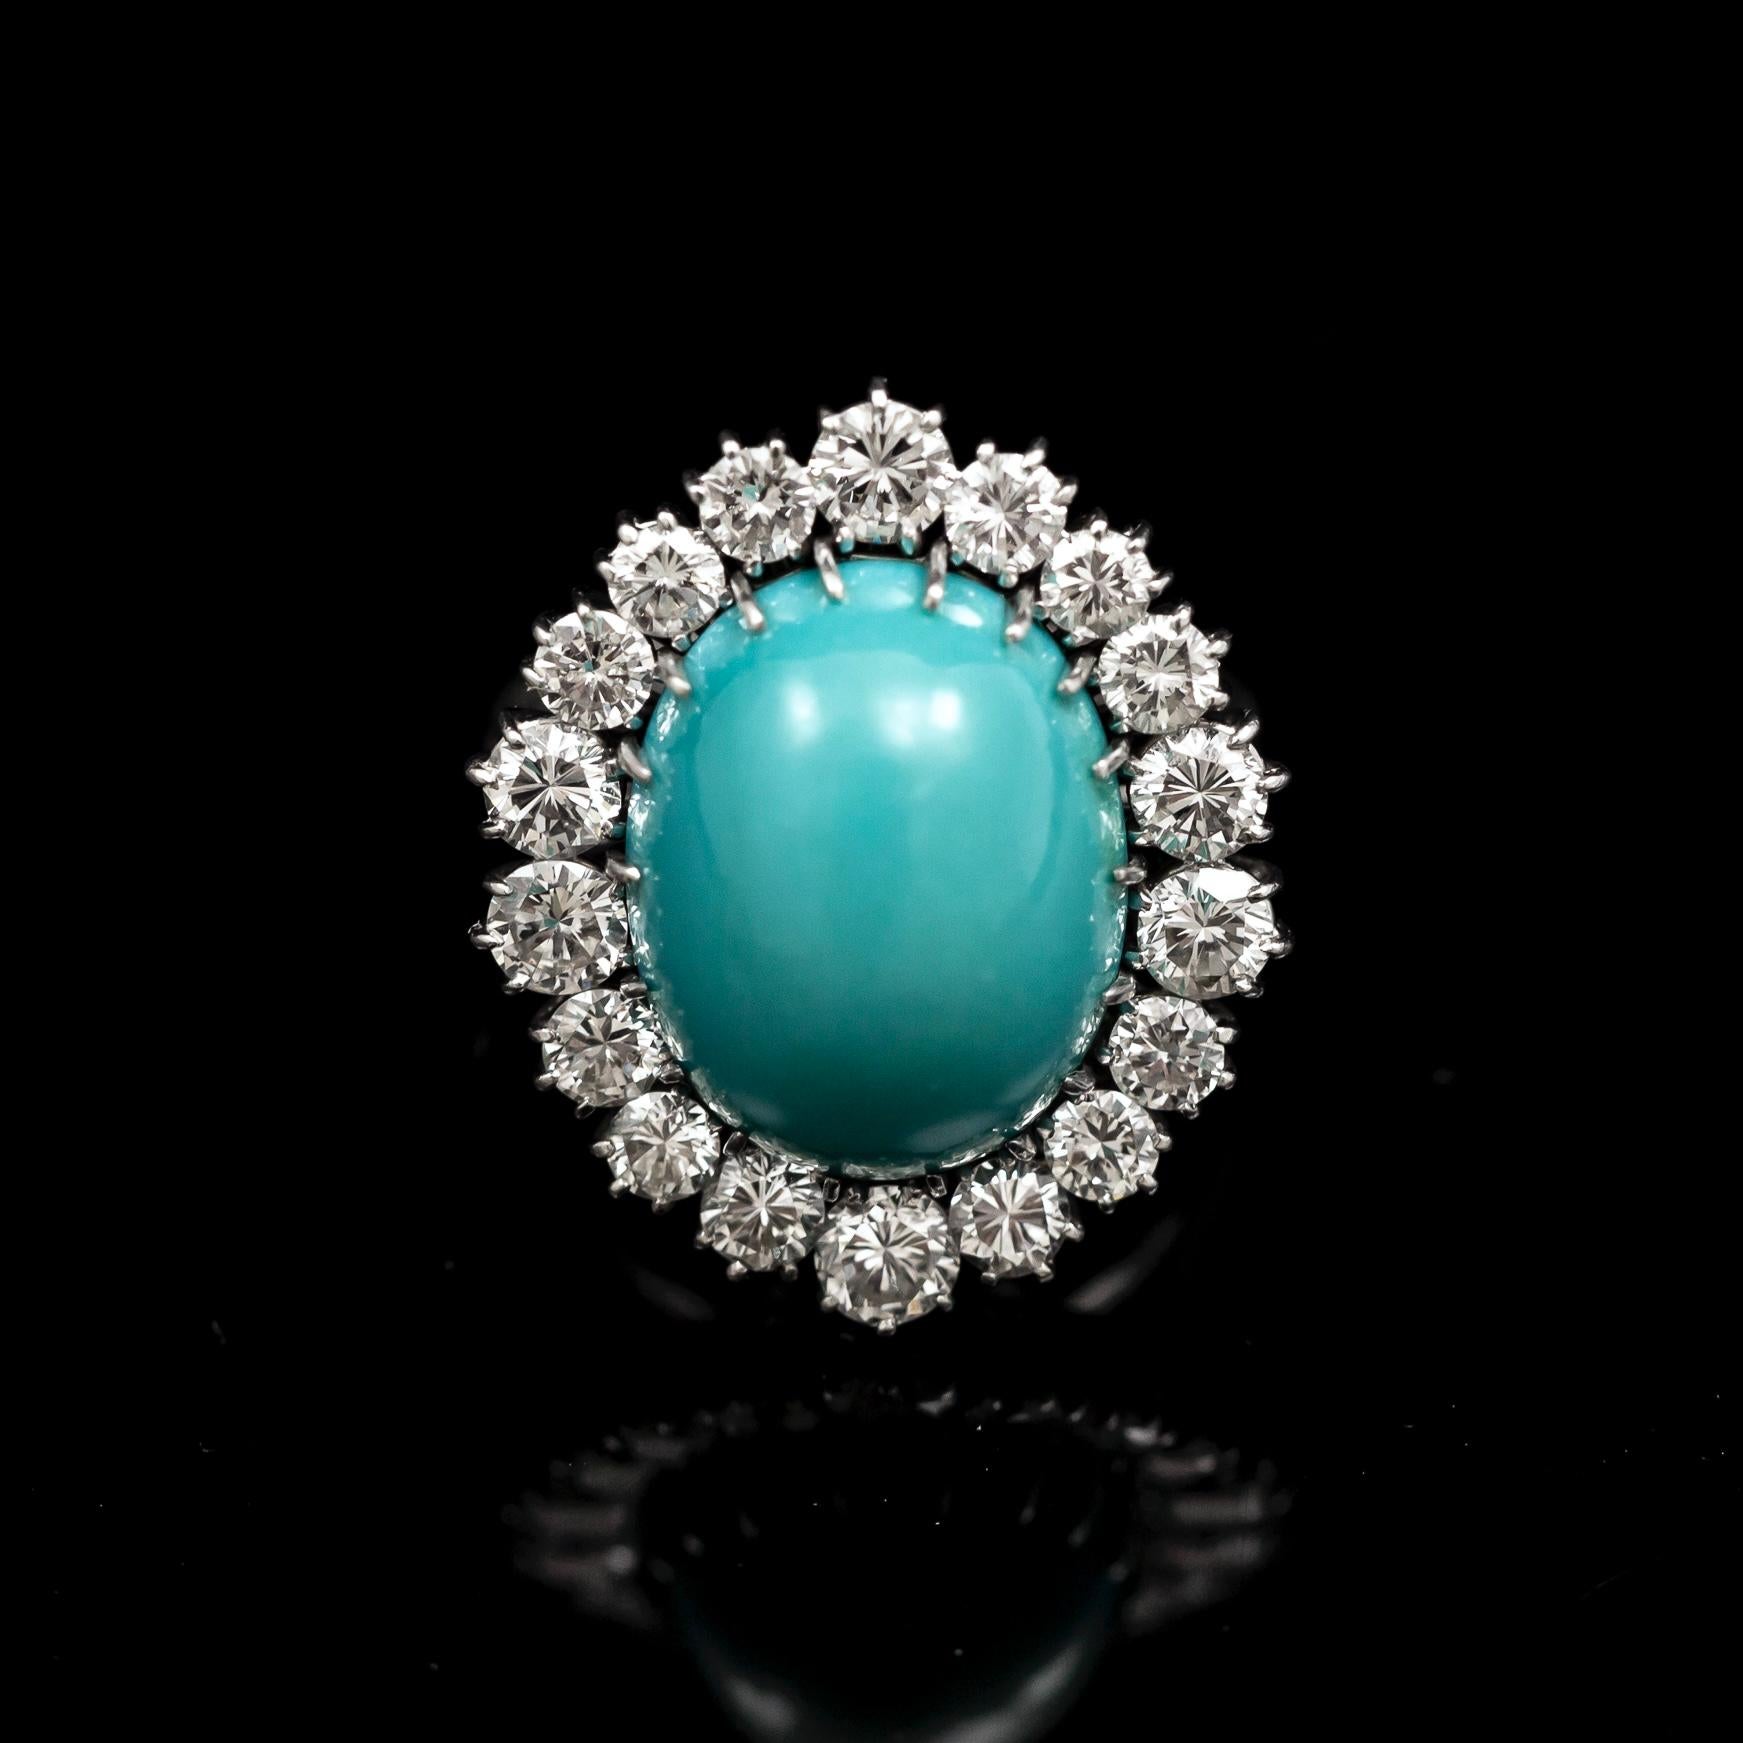 A Mid-Century turquoise and diamond cluster cocktail ring in platinum, 1950s/1960s. Of a cluster design, this dress ring features an oval cabochon turquoise stone claw-set to the center, surrounded by 18 round brilliant-cut diamonds of similar sizes